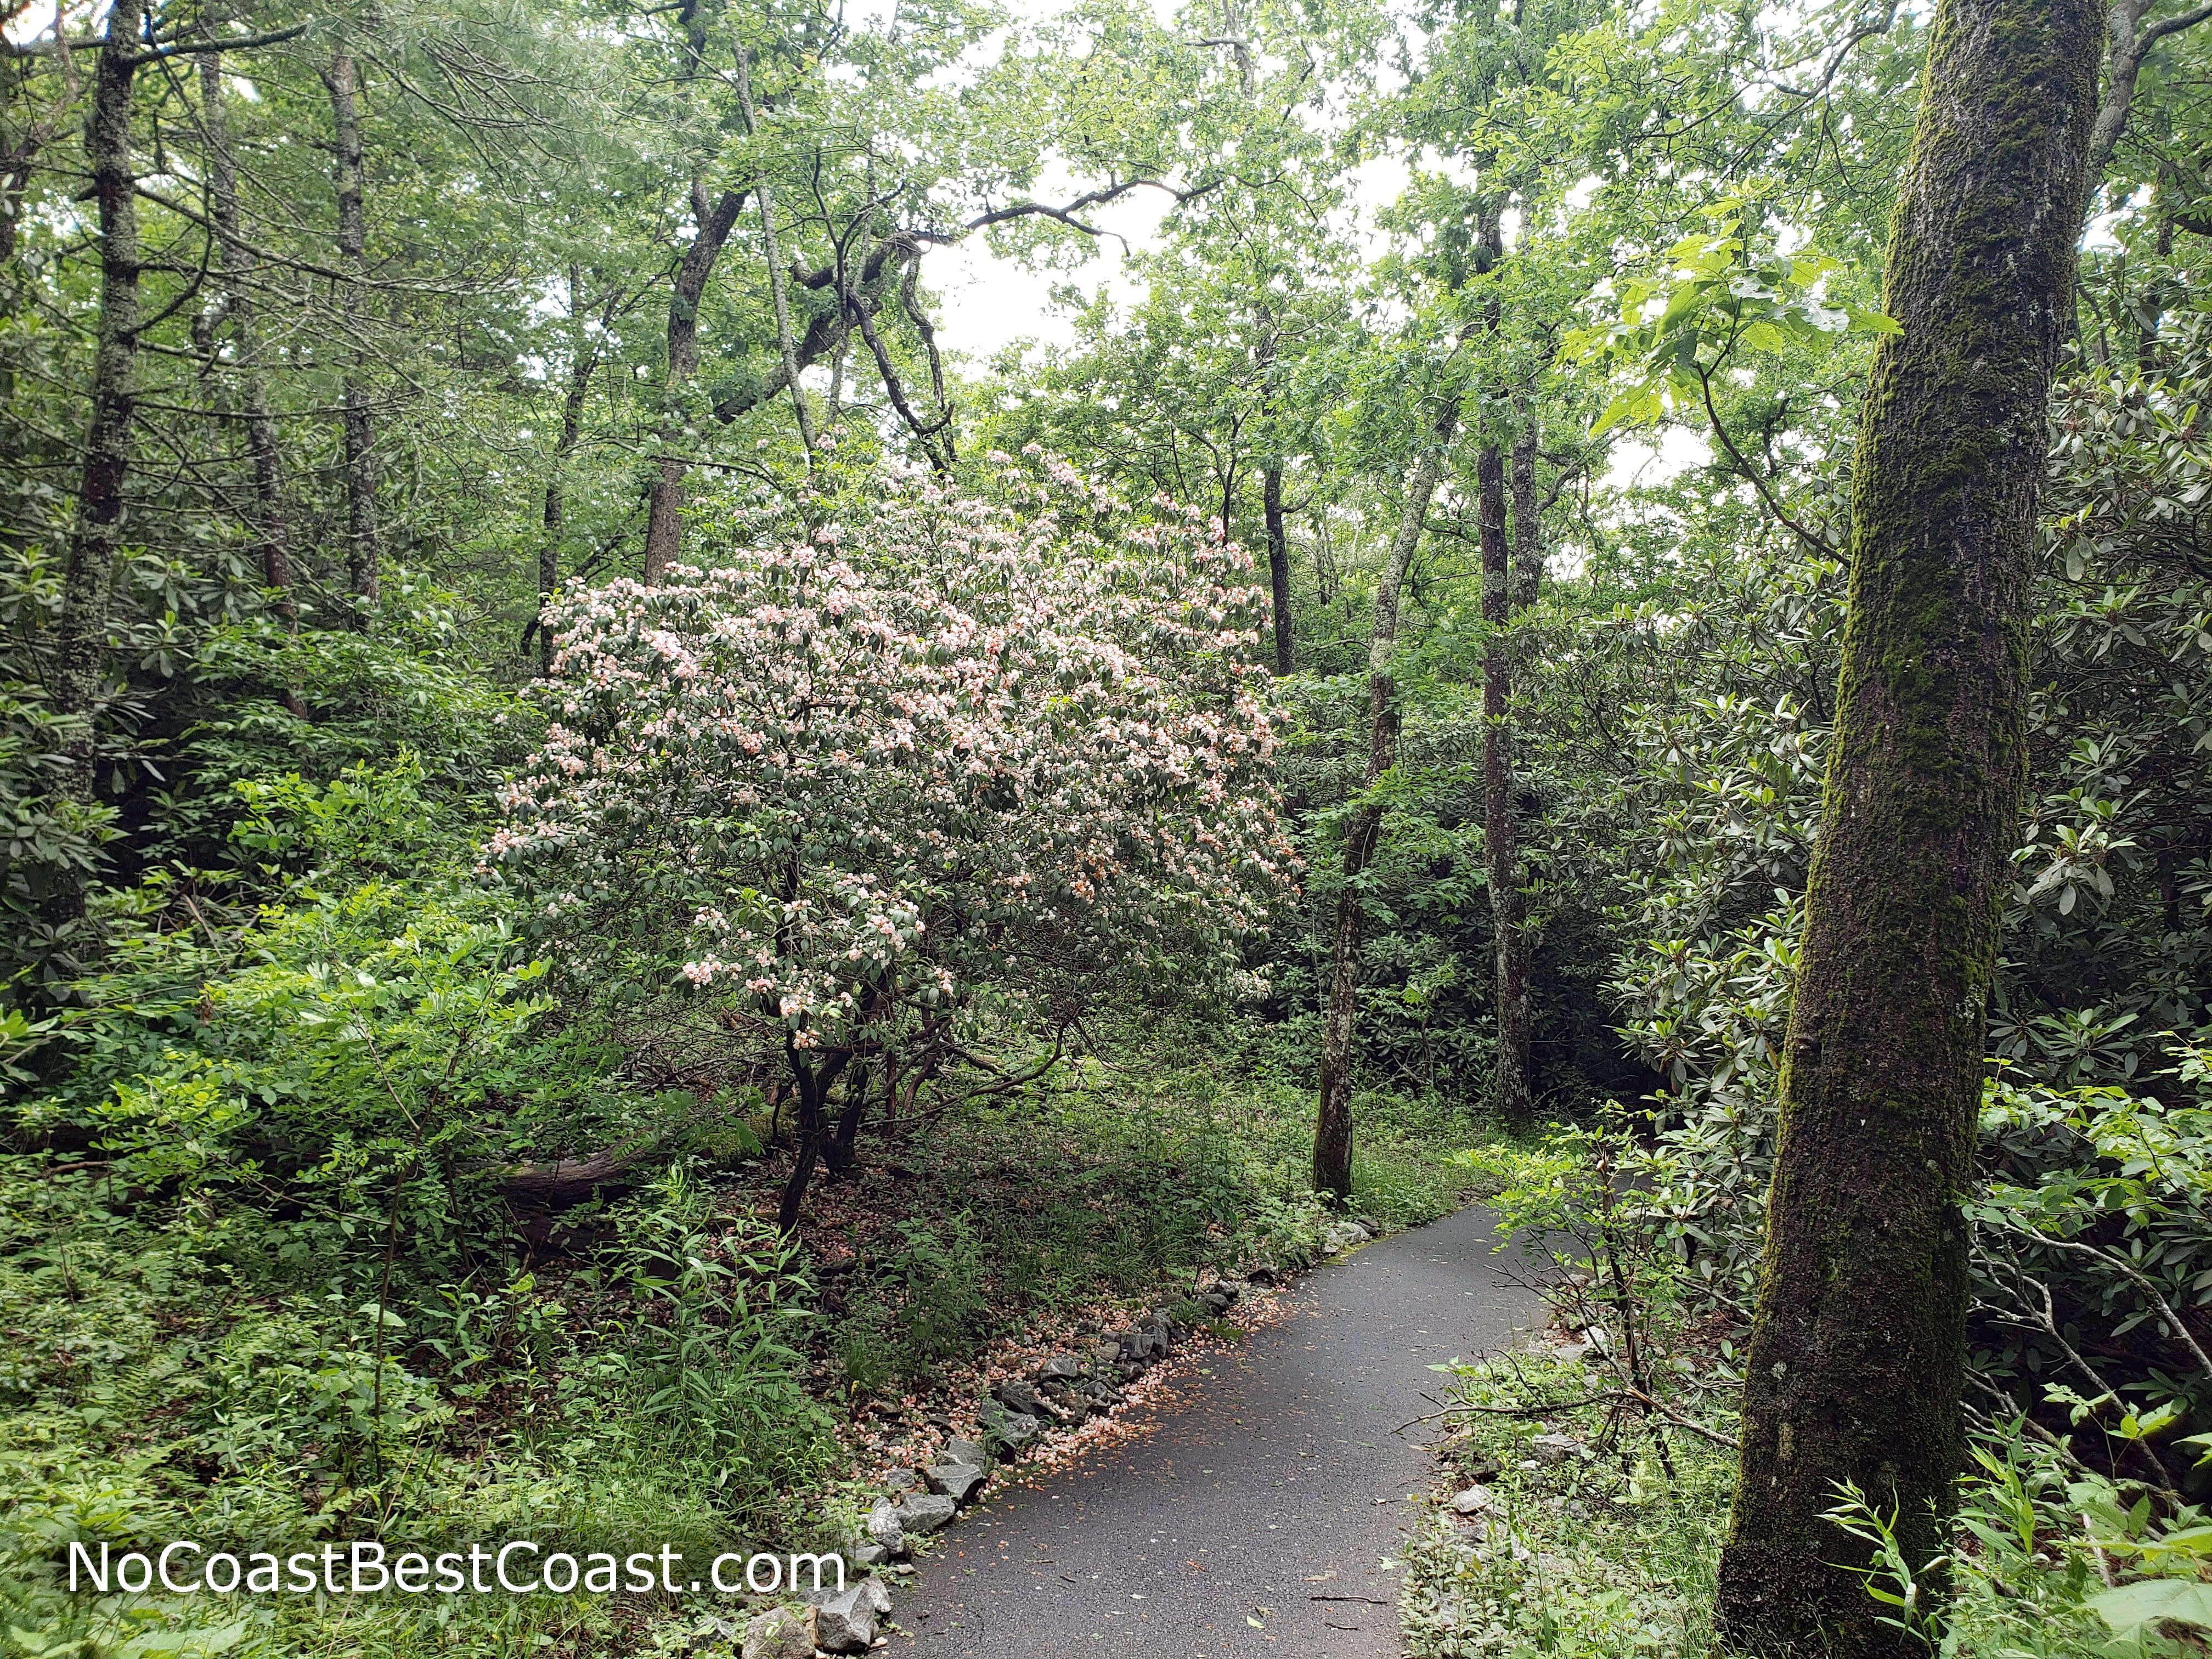 In the summer, mountain laurels bloom pink along the trail